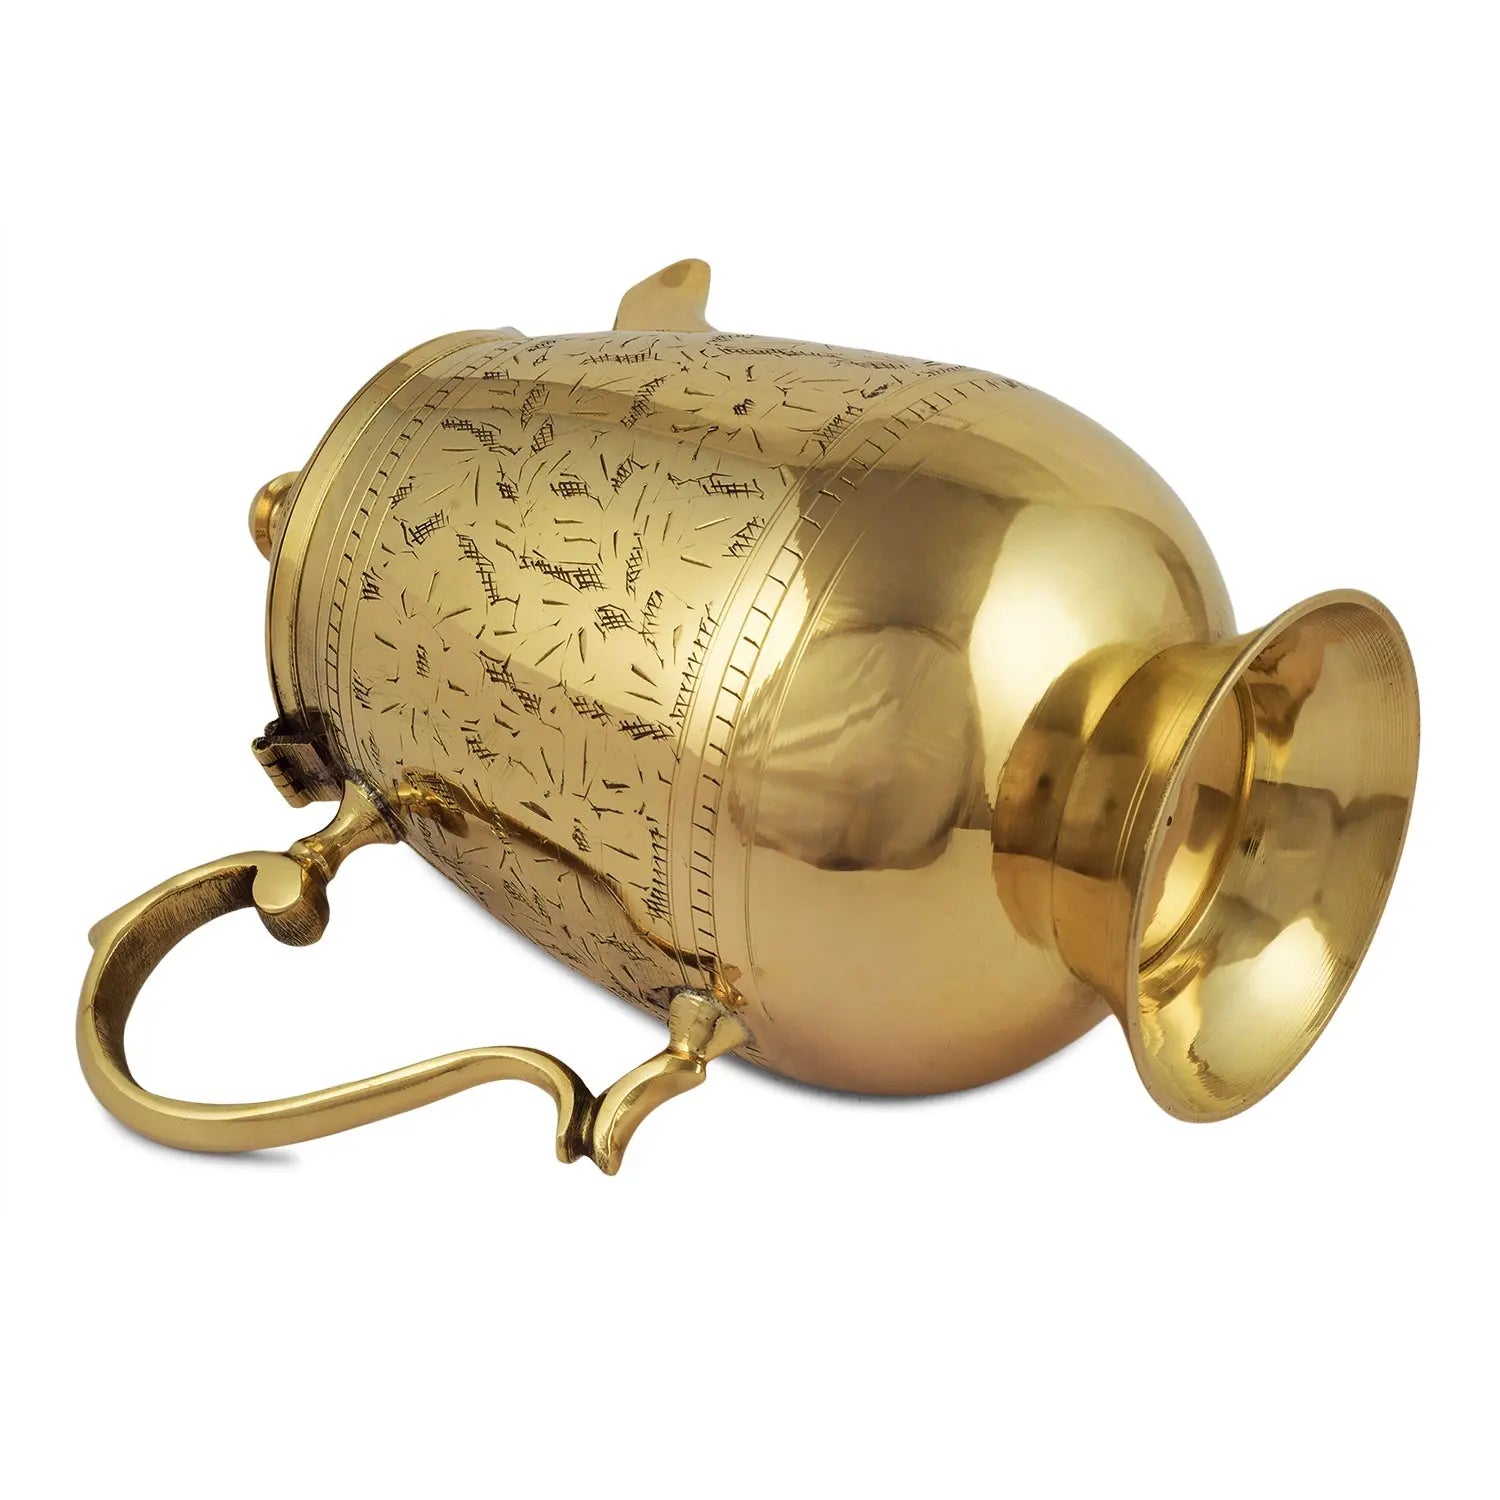 Pure Brass Barrel Design Jug Pitcher Jar with Lid for Storage & Serving Water Drinkware - CROCKERY WALA AND COMPANY 